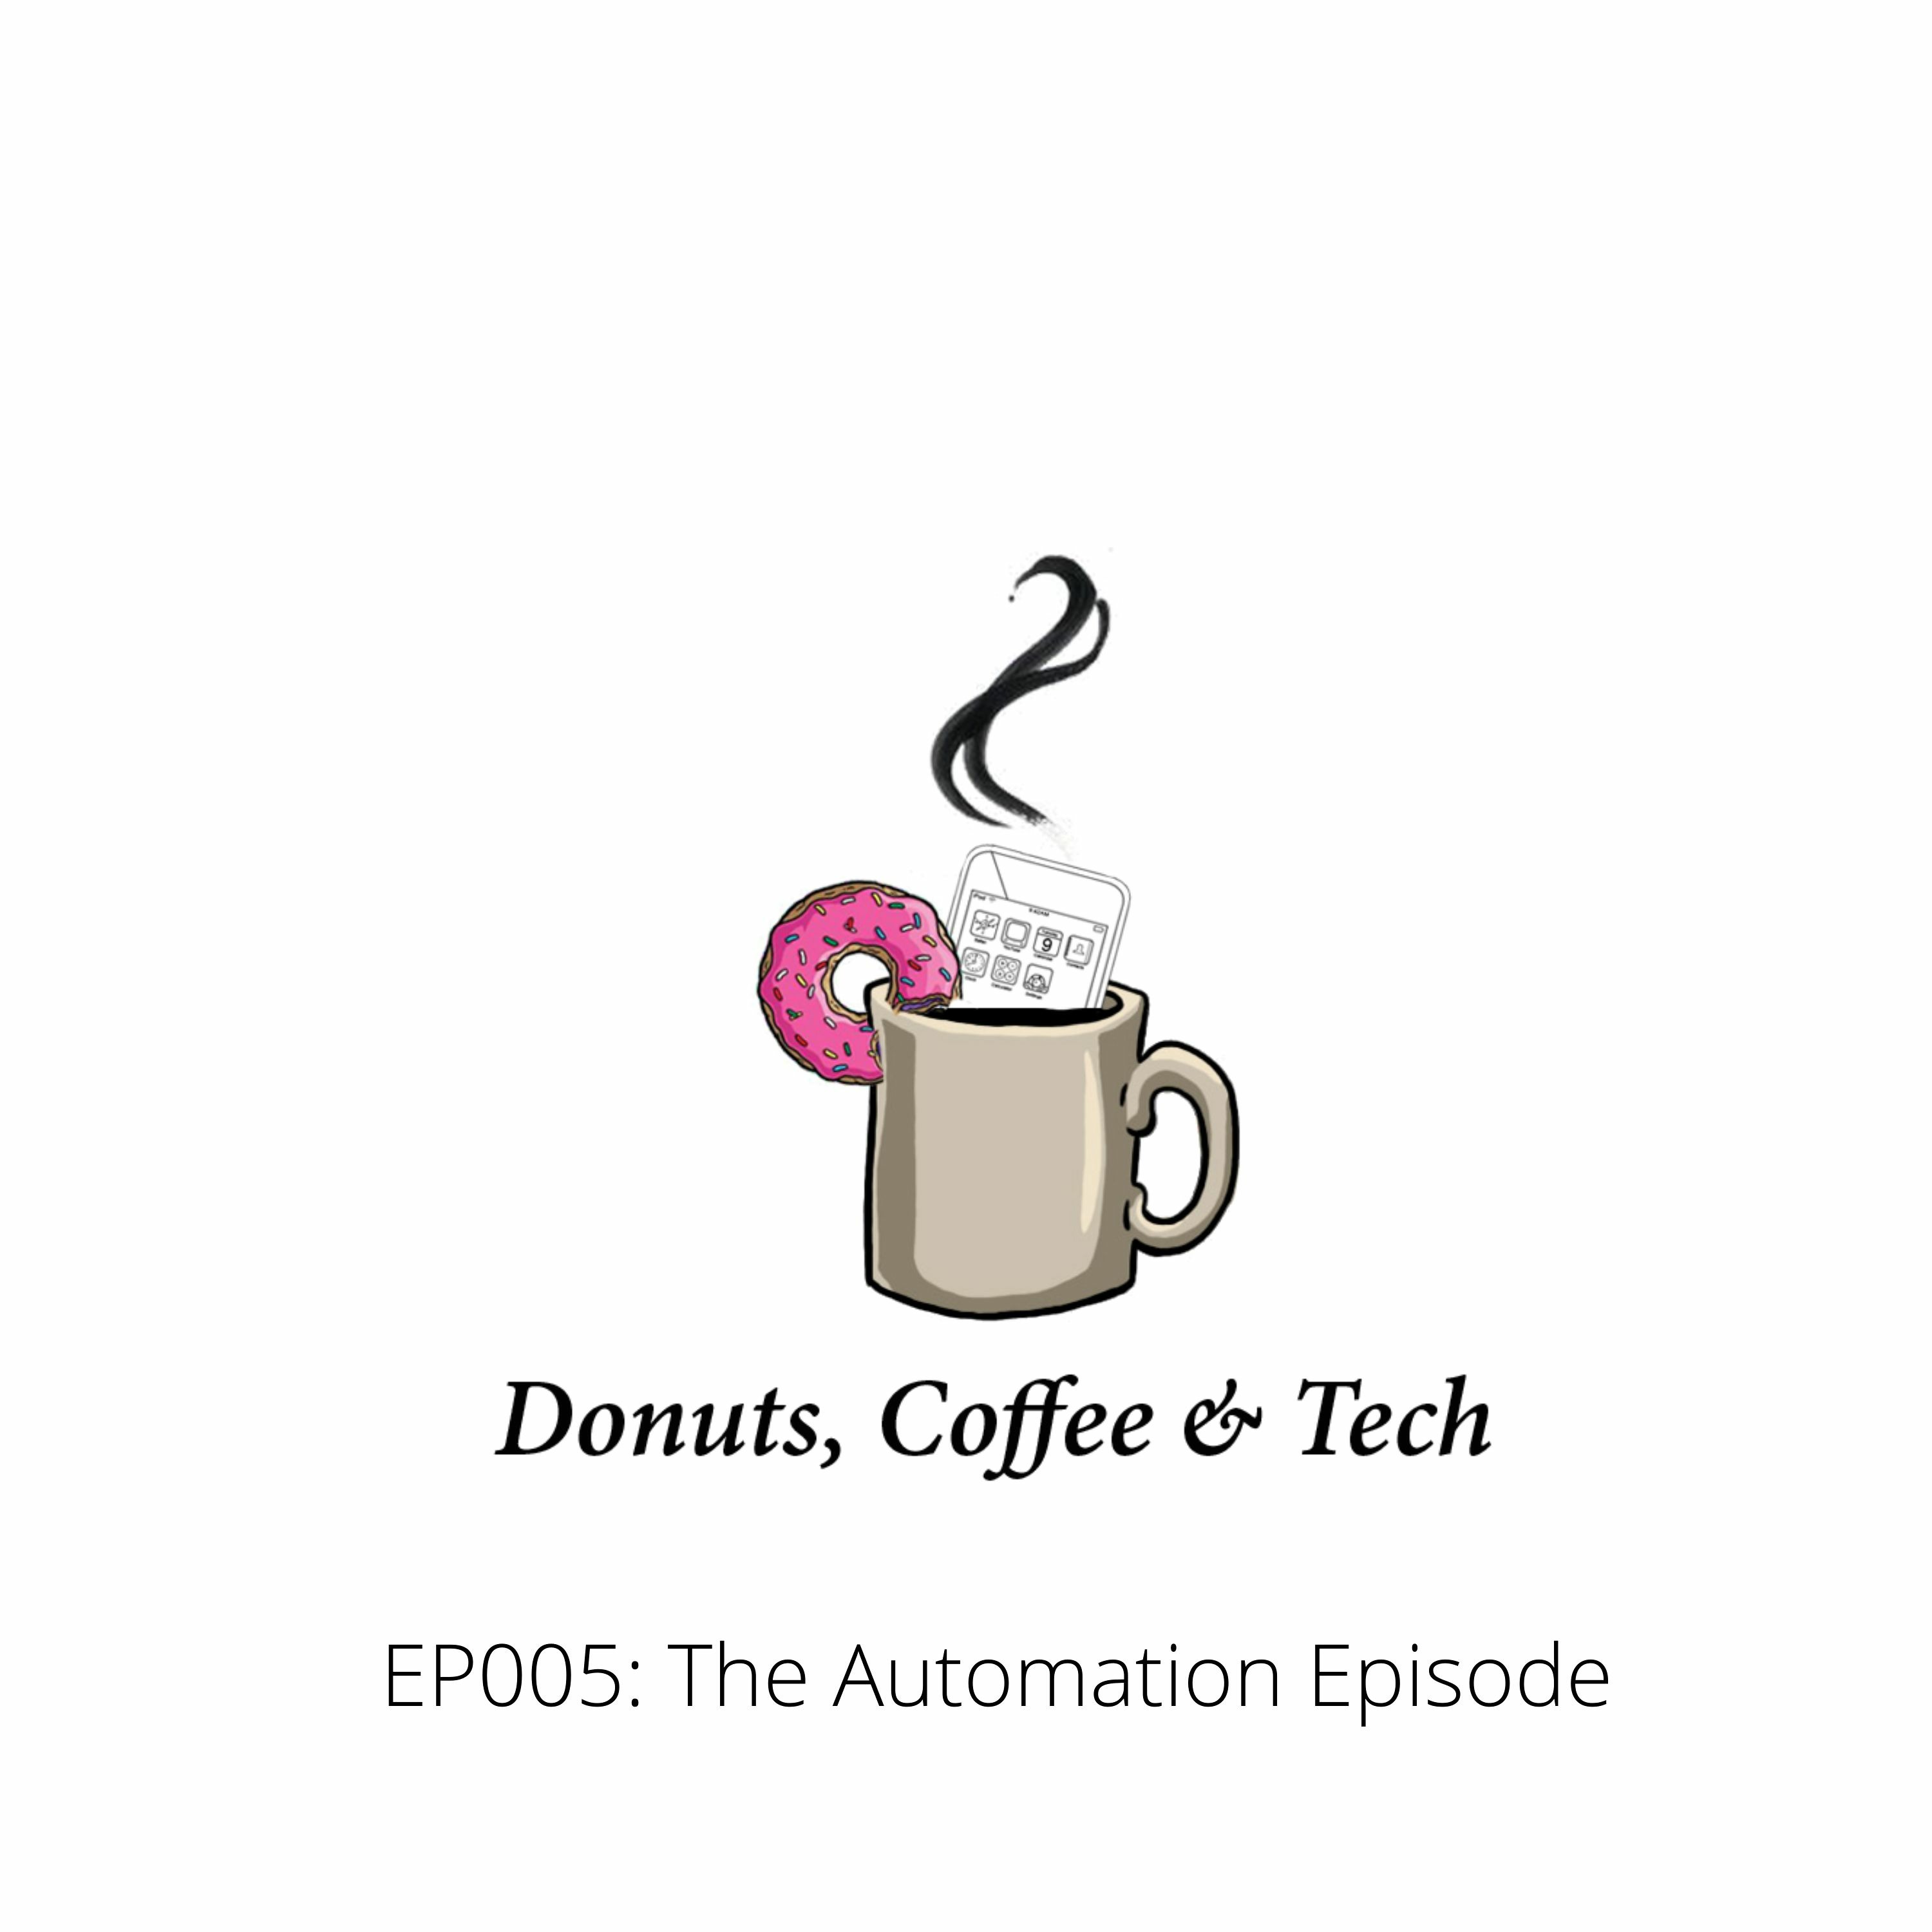 Donuts, Coffee & Tech EP 005: The Automation Episode